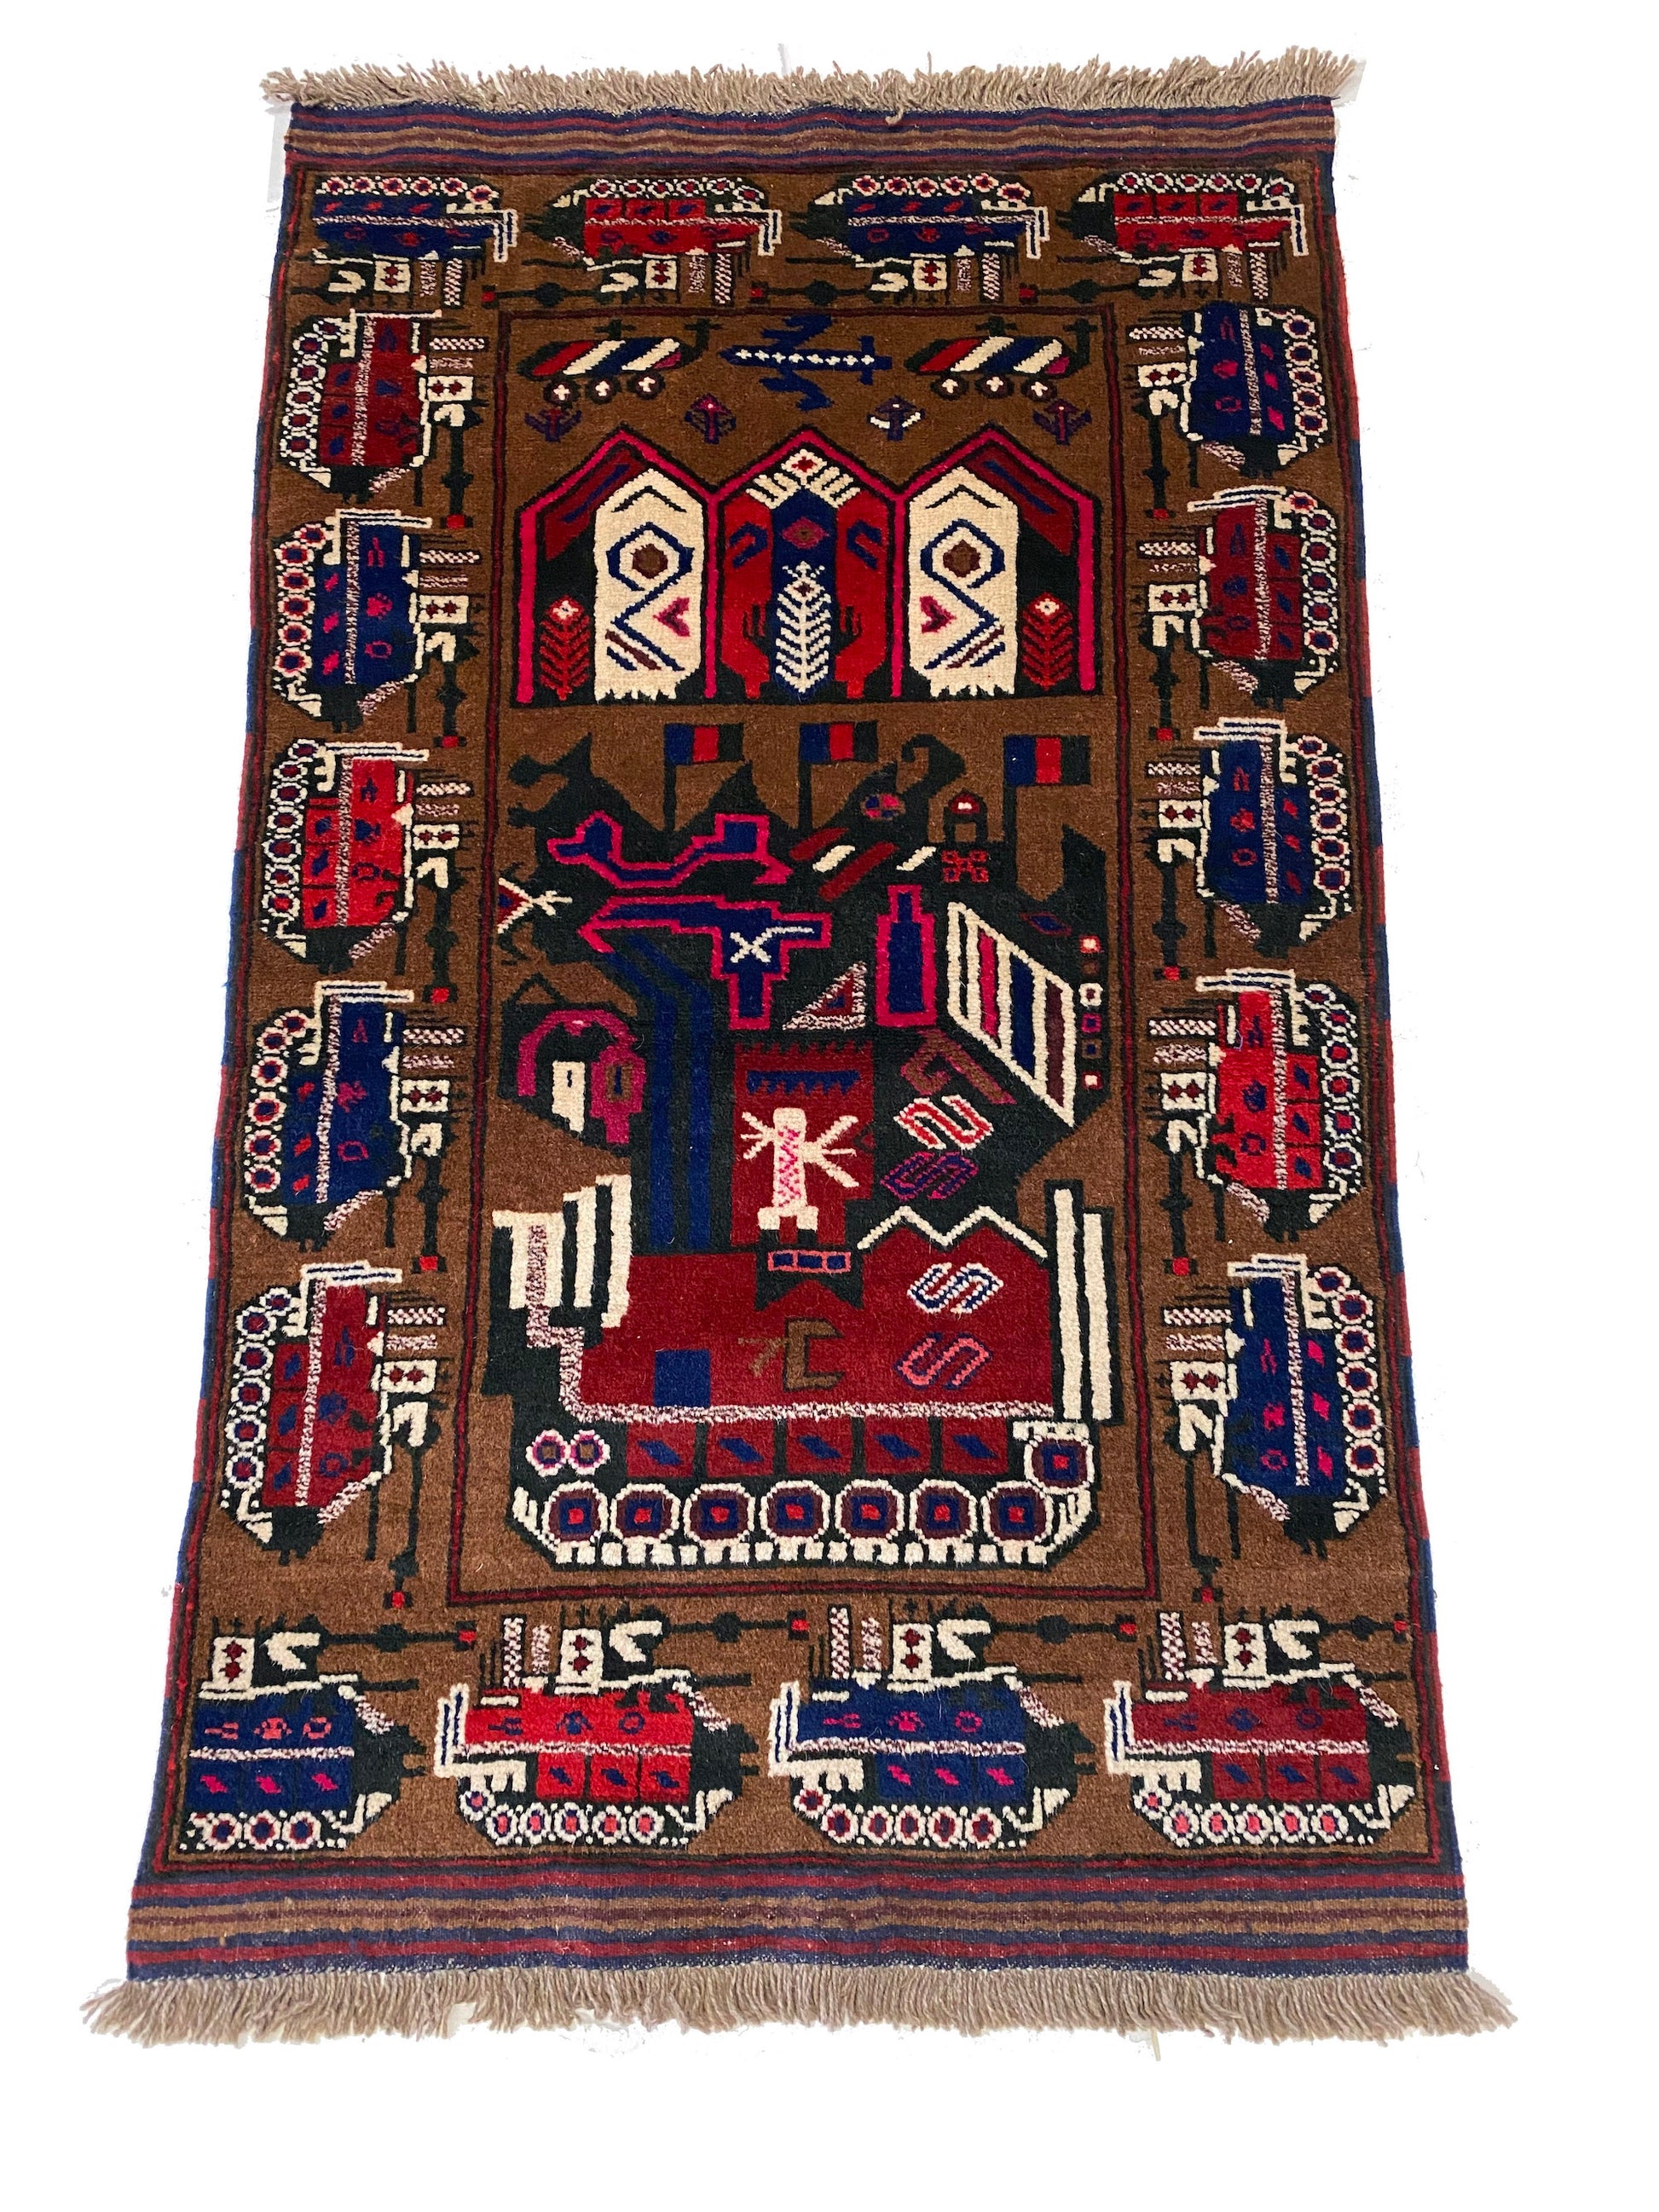 Hand woven Afghan War Rug with tan base and vibrant blue, red and cream tanks and symbols throughout - Available from King Kennedy Rugs Los Angeles